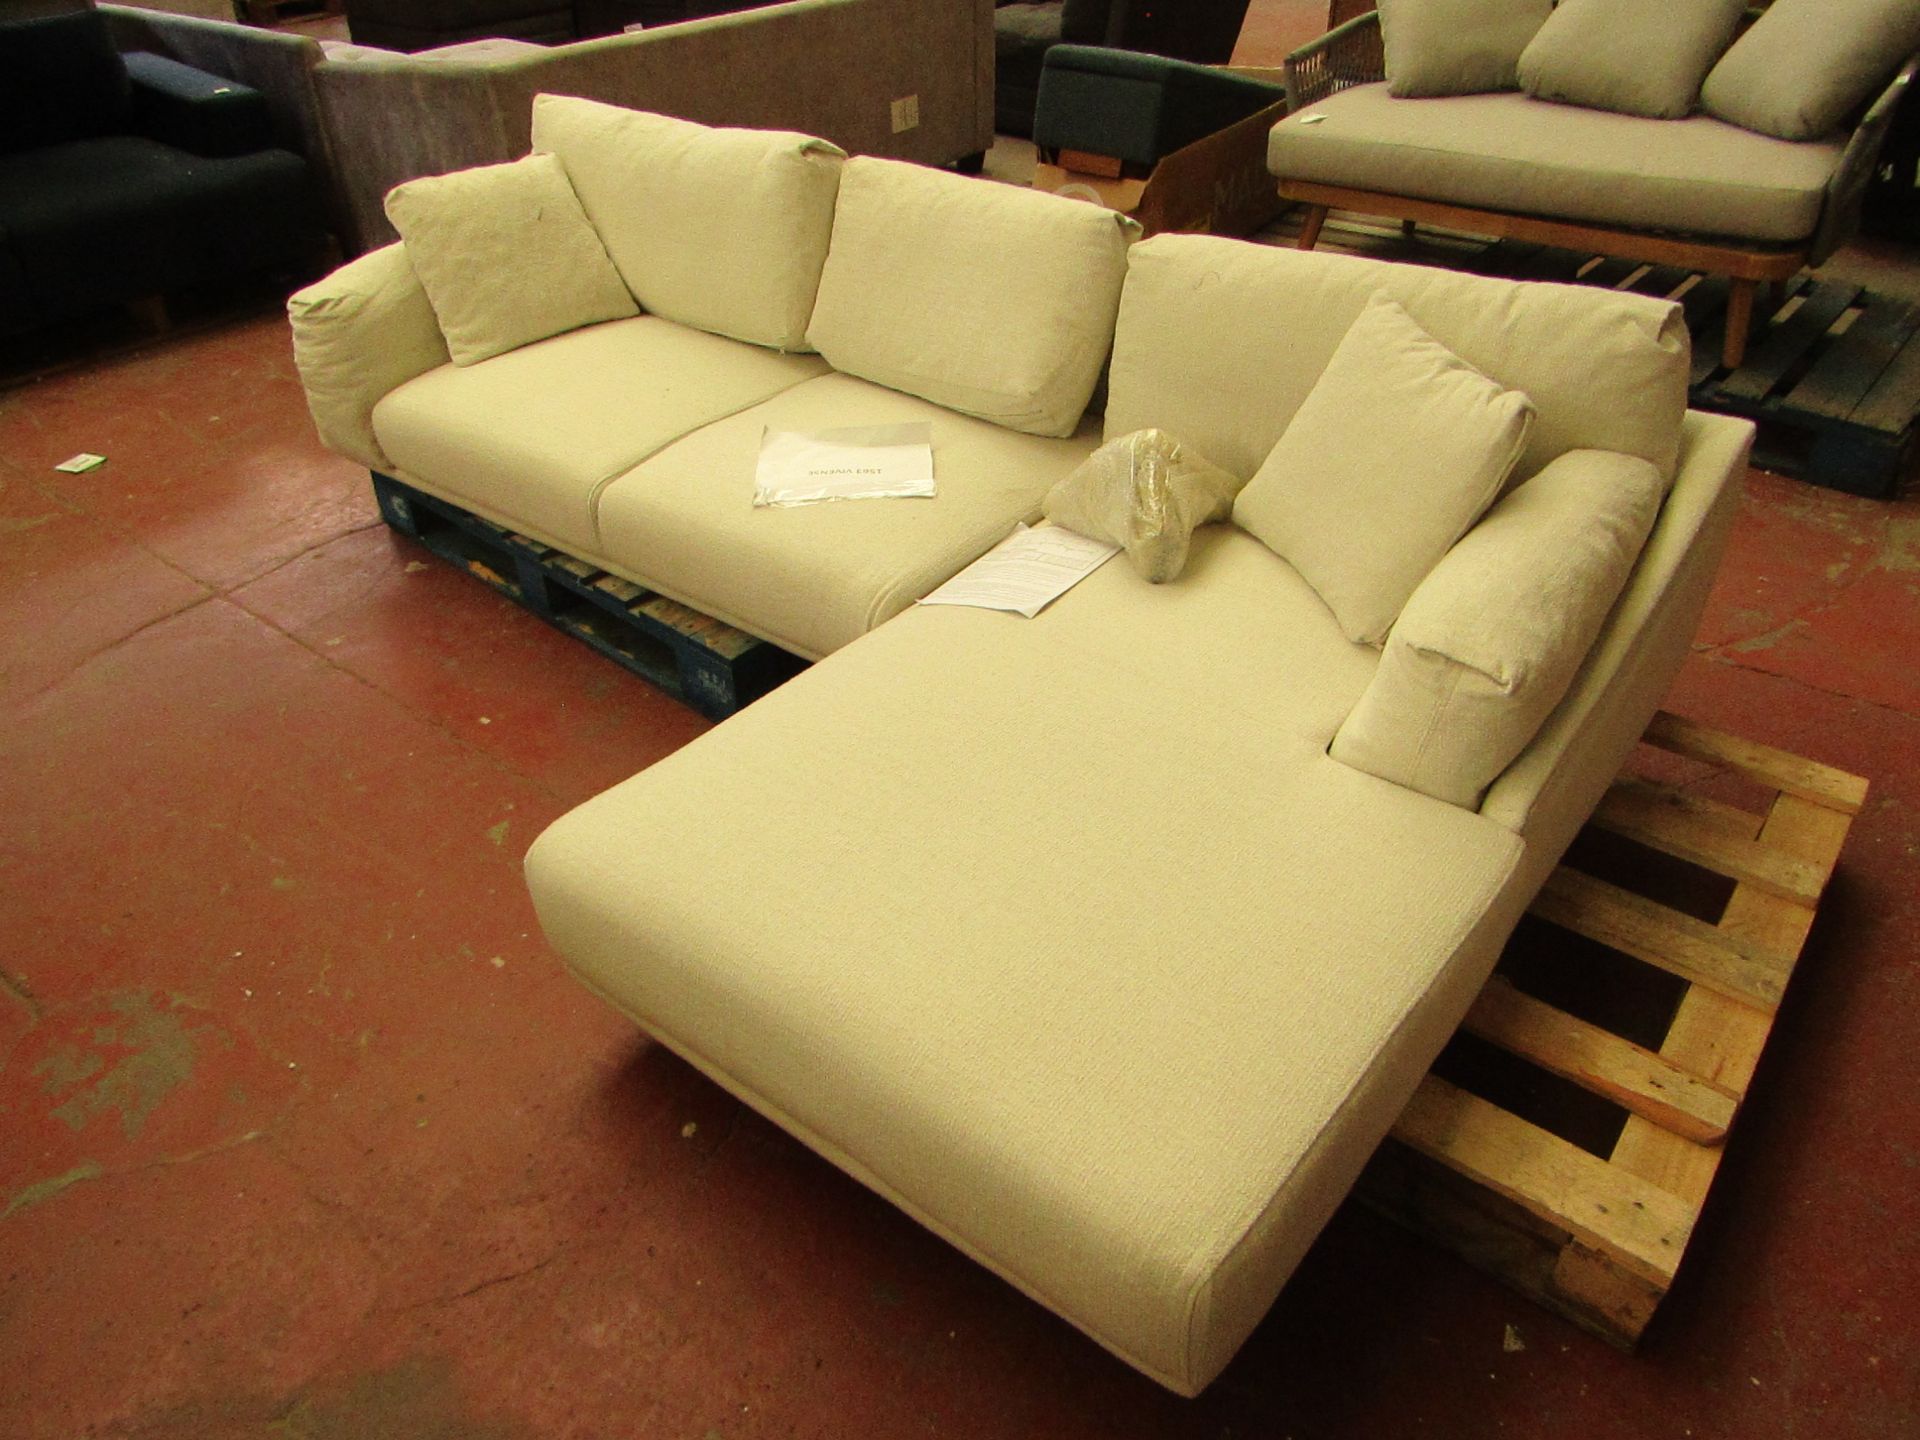 | 1X | VIVENSE LEO CORNER SOFA RIGHT HAND CORNER SOFA | NEEDS A CLEAN BUT OTHERWISE IN GOOD CONDITON